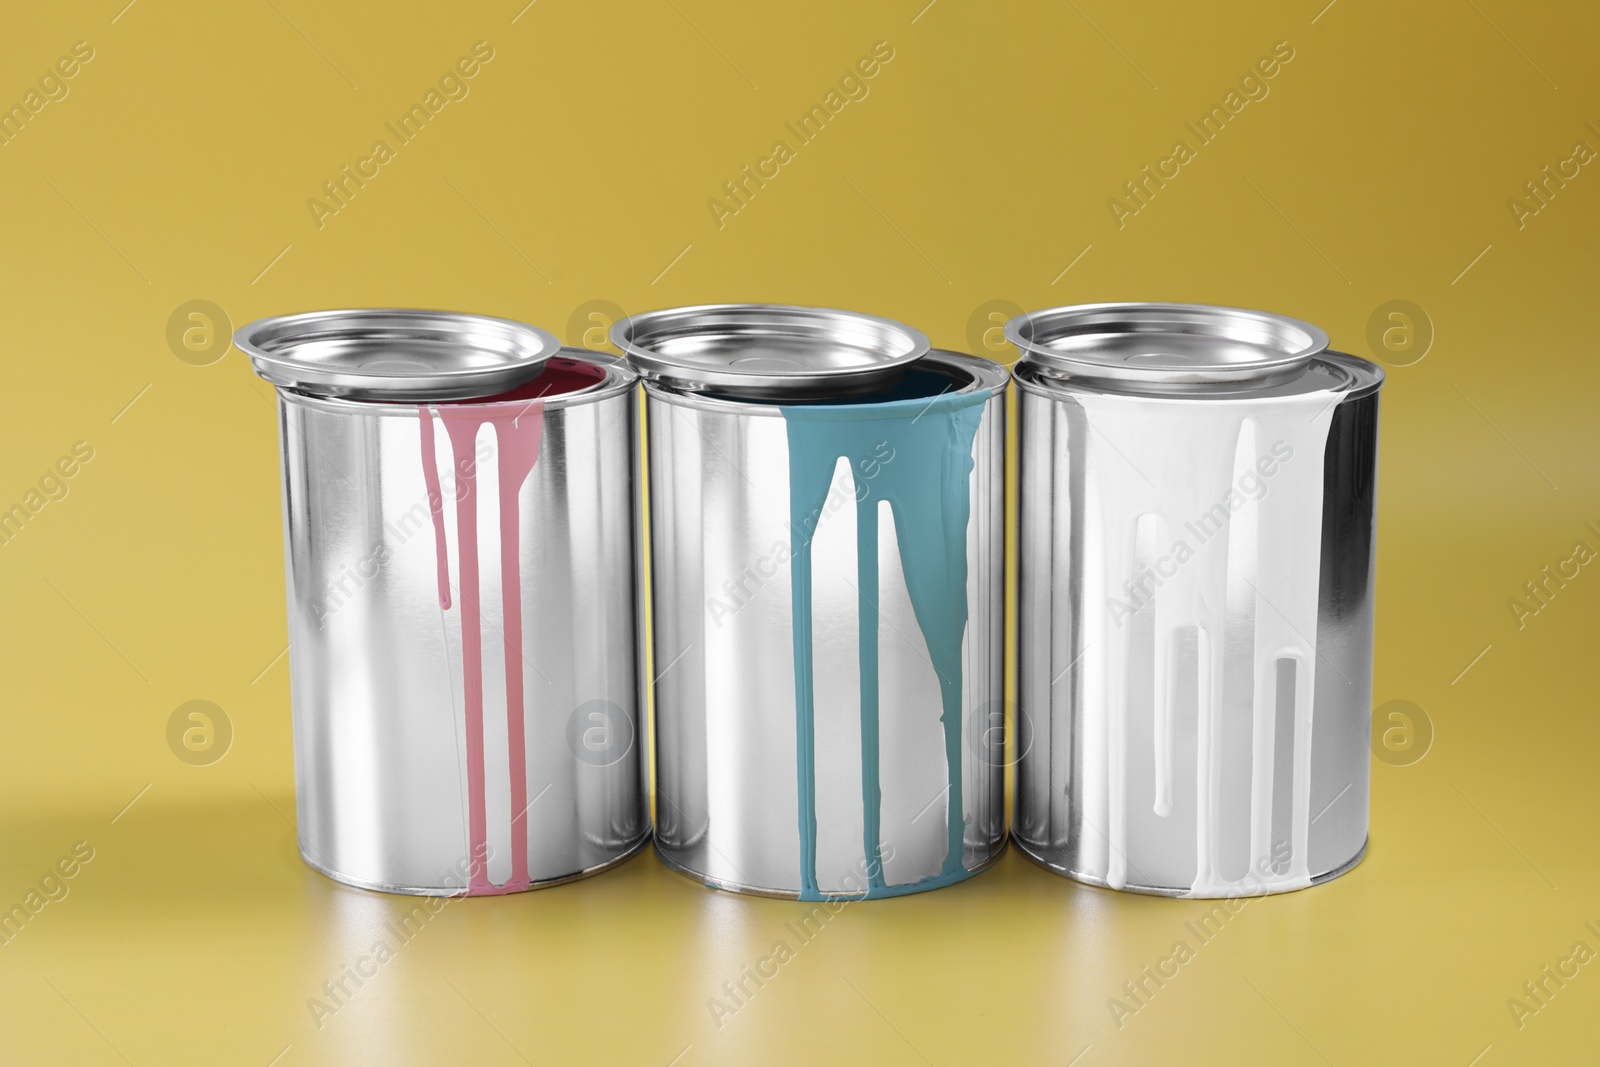 Photo of Cans of different paints on yellow background